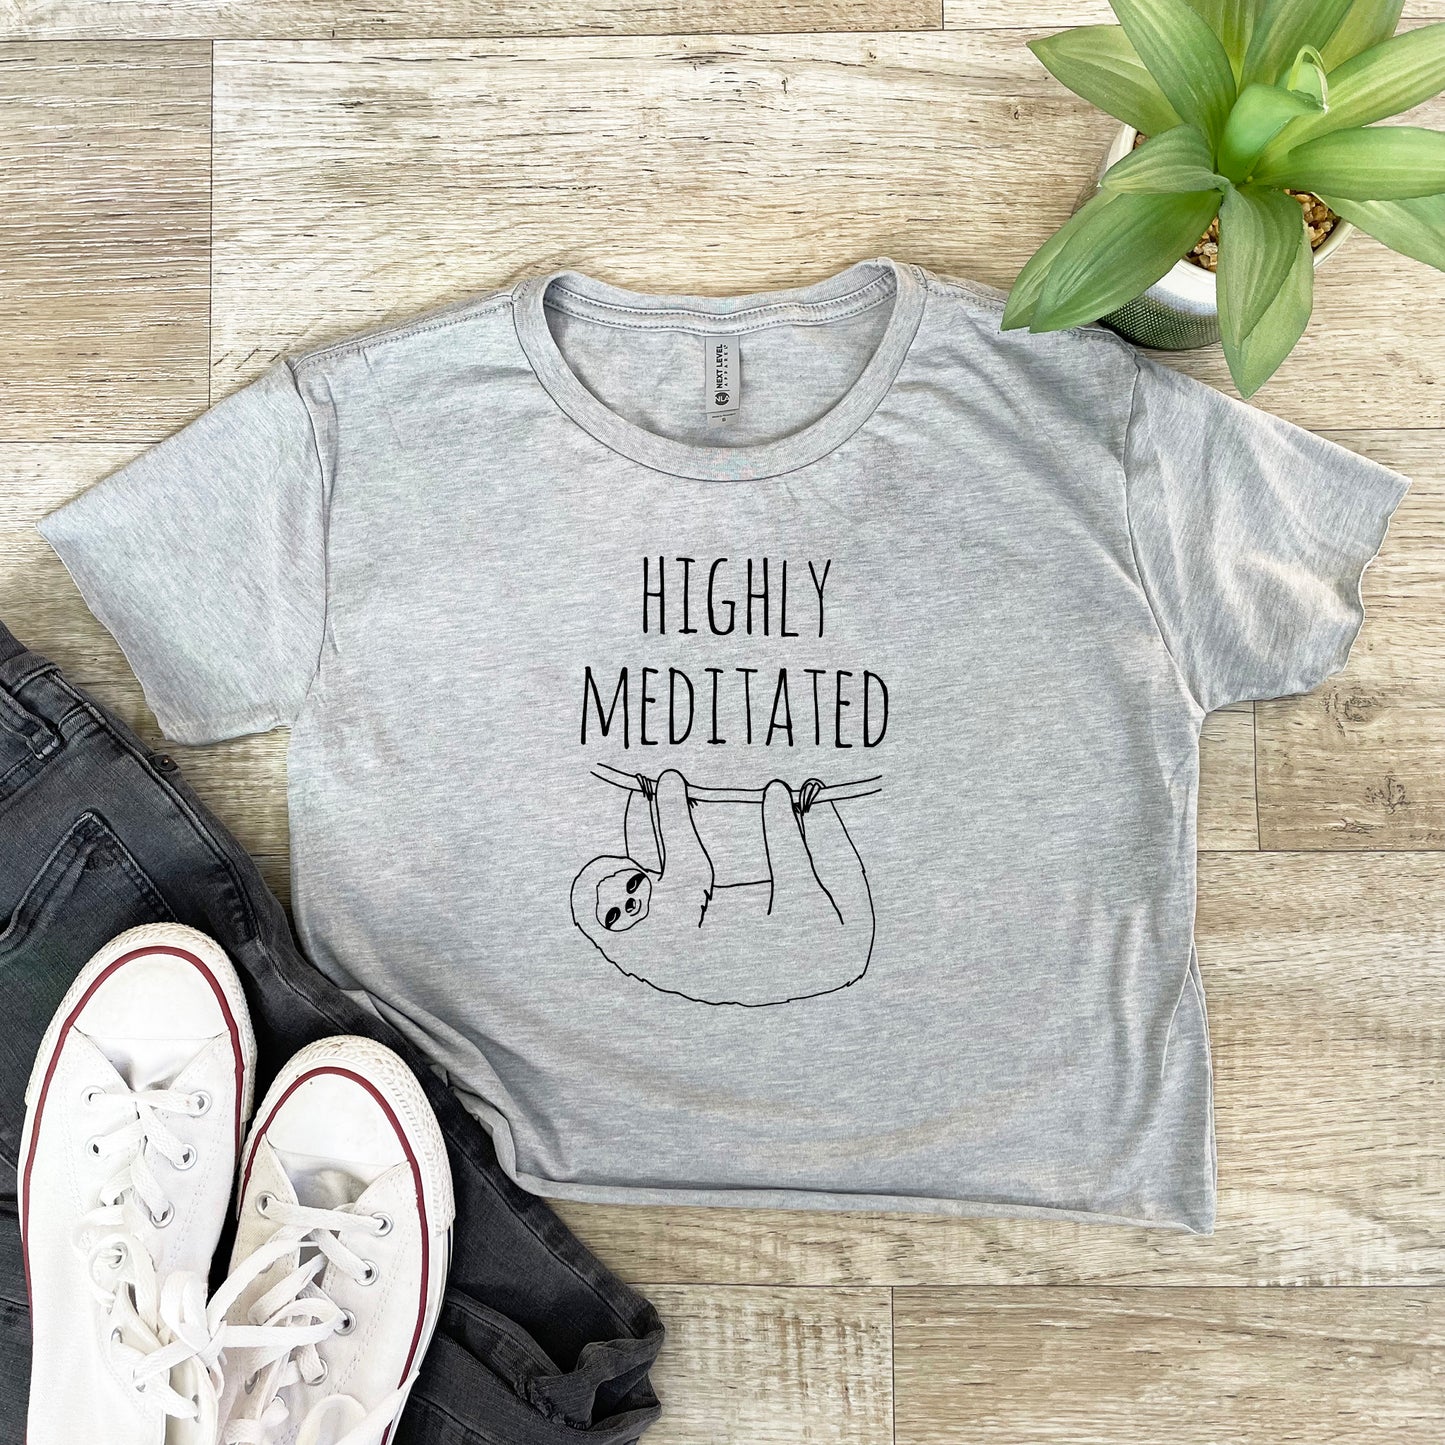 Highly Meditated (Sloth) - Women's Crop Tee - Heather Gray or Gold